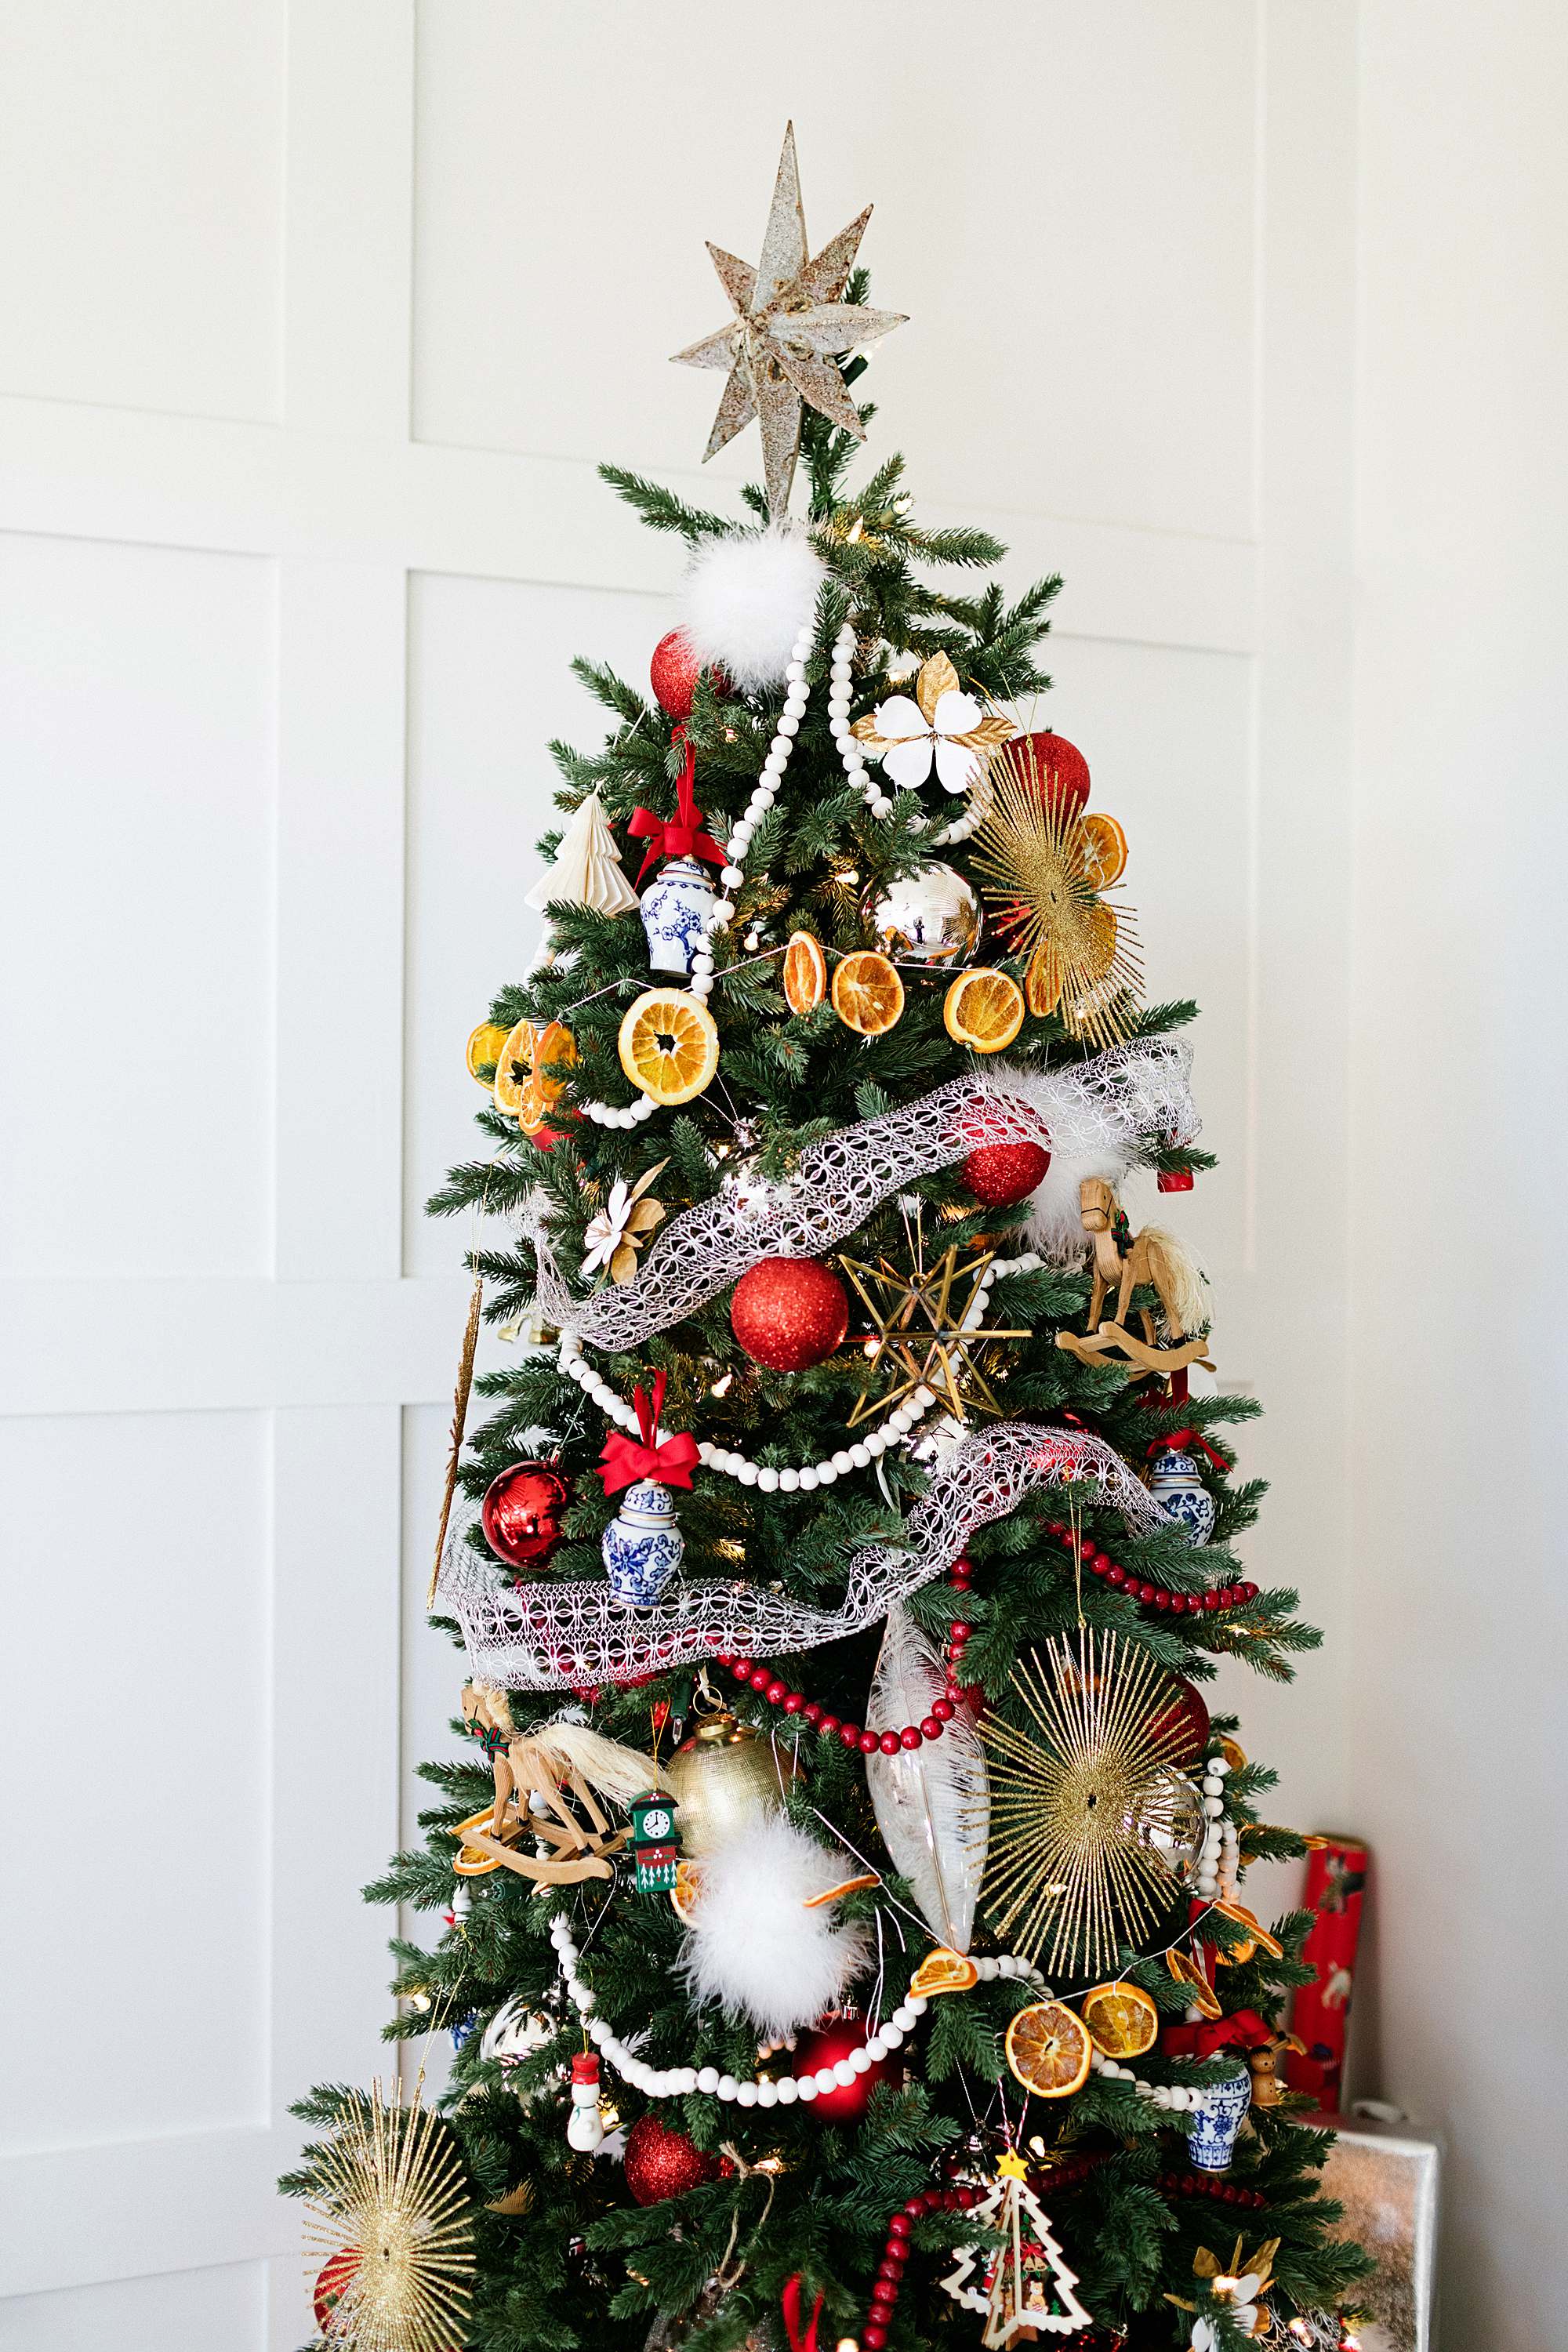 christmas tree top half with orange slices and red ornaments - red and white decor, vintage star ornament top